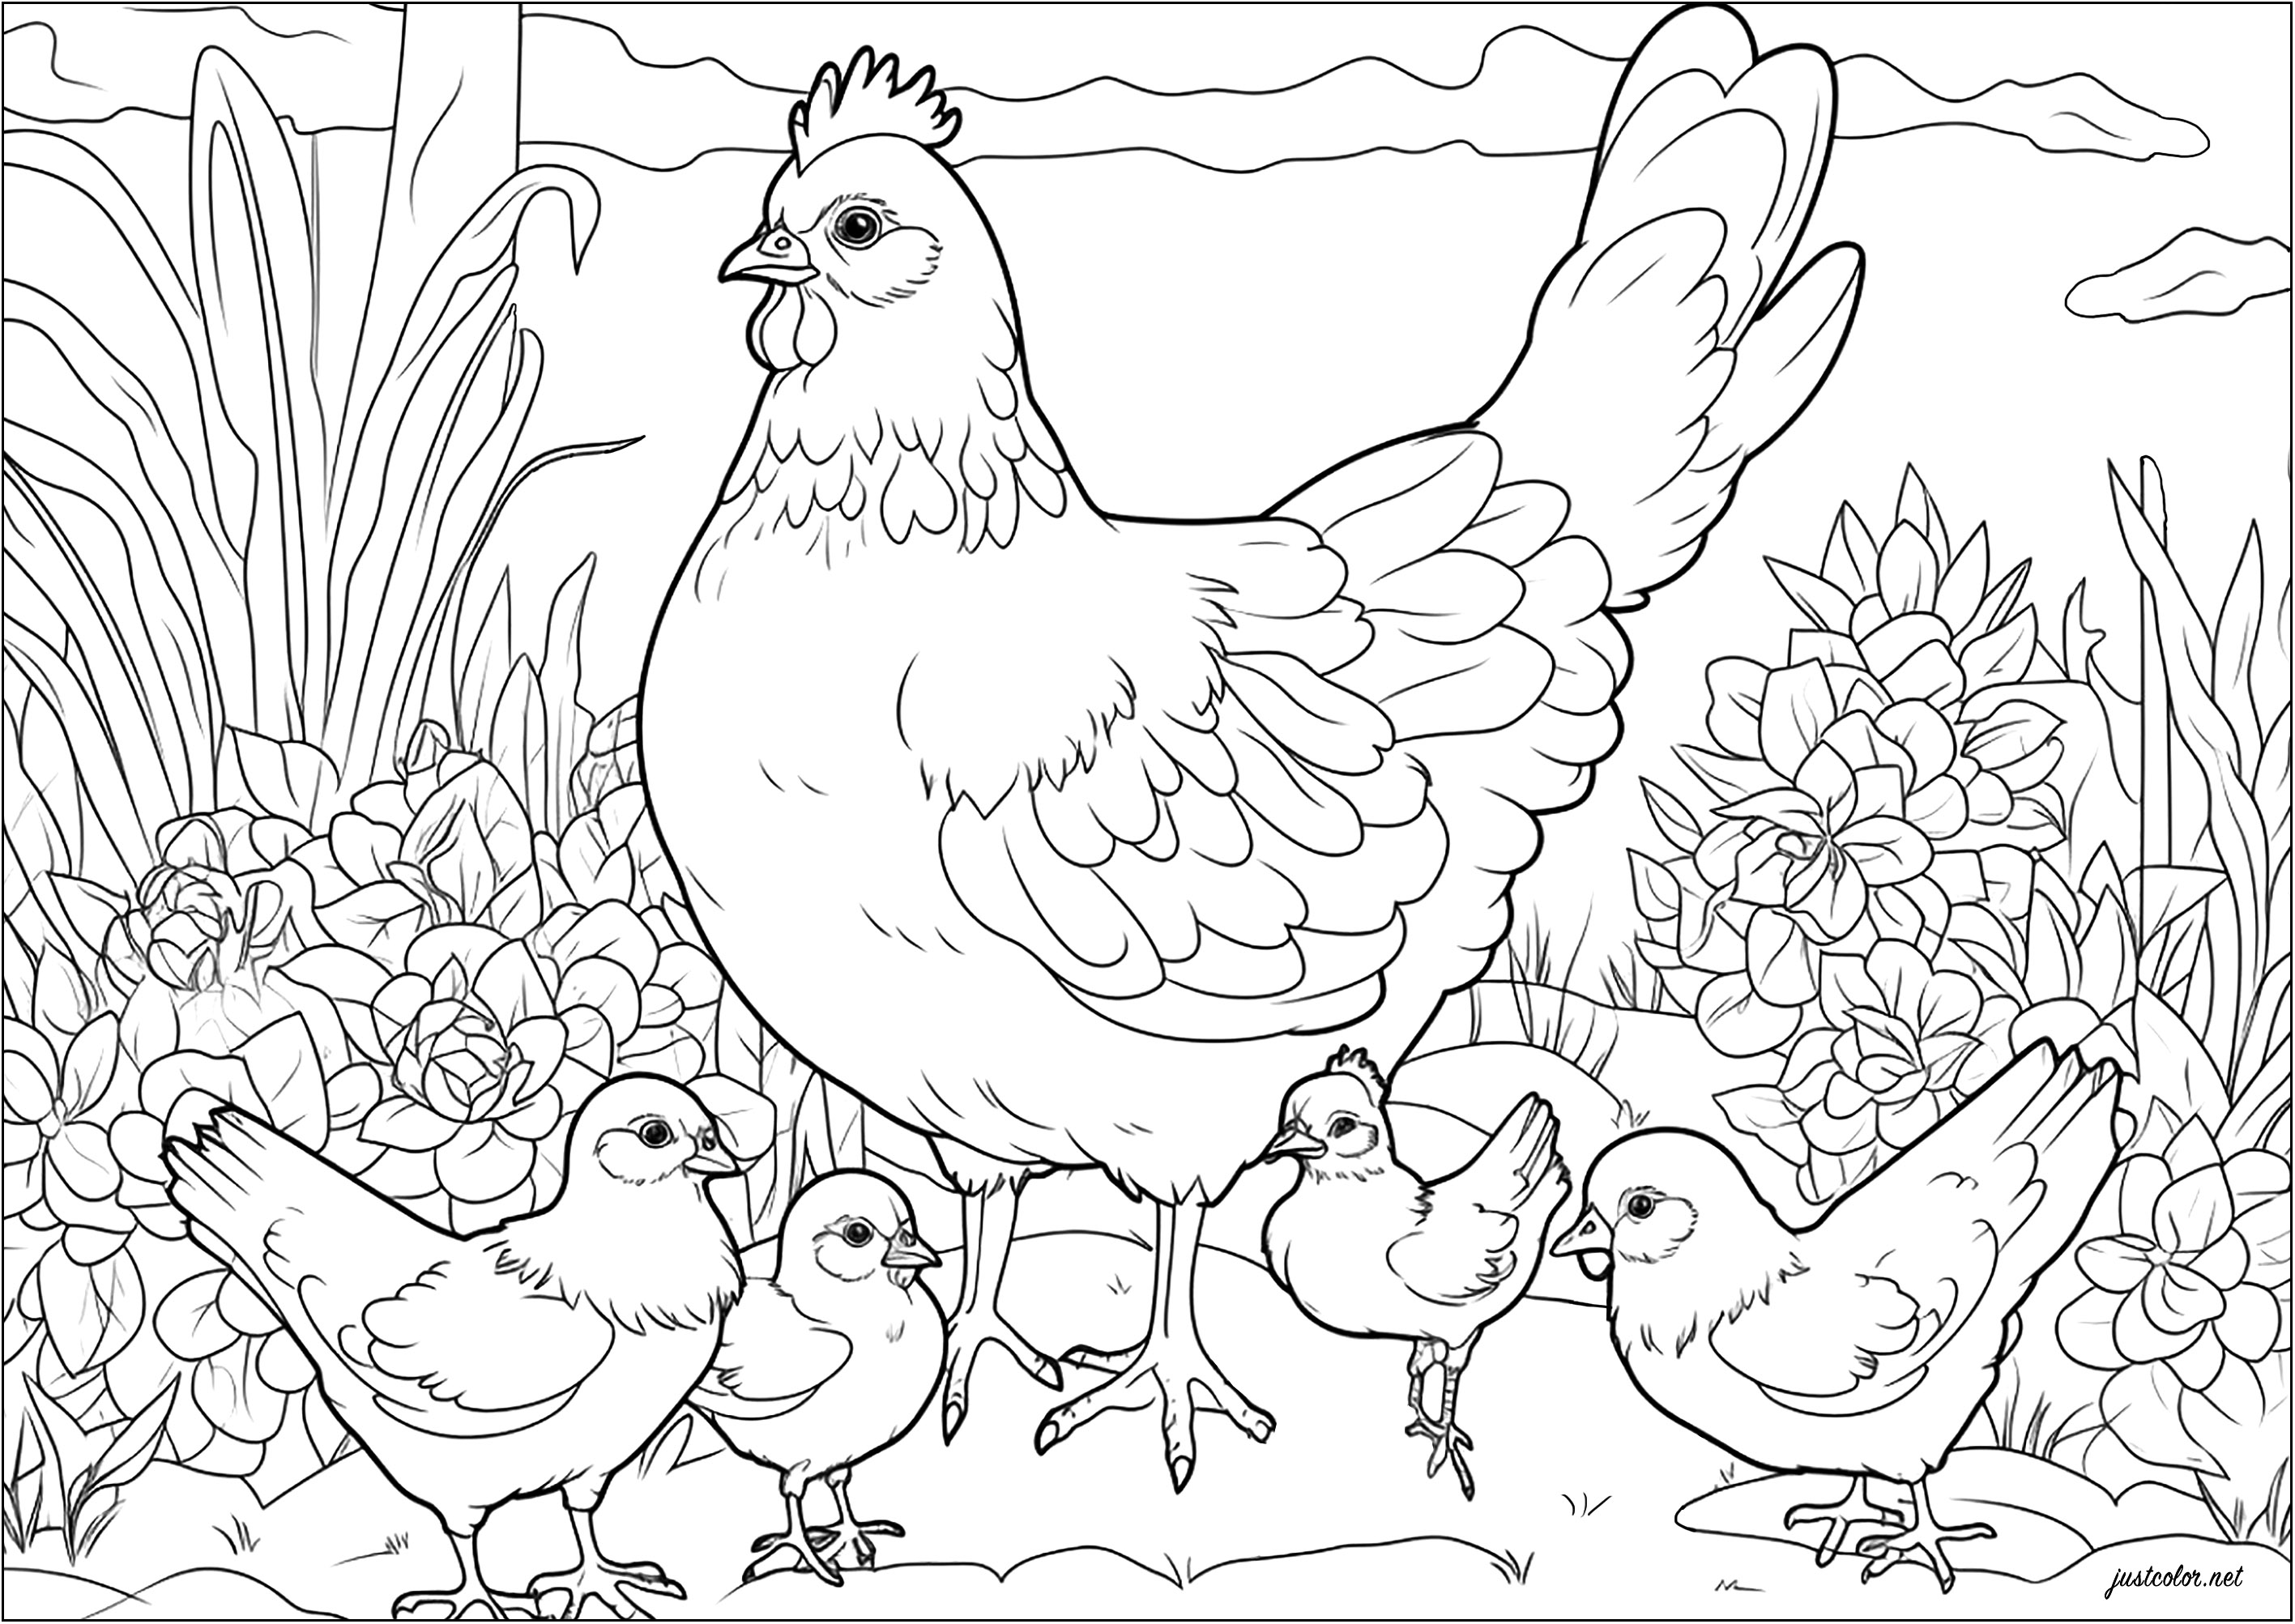 Coloring of a hen and her chicks. This hen is proudly protecting her young.Beautiful vegetation in the background to color as well.